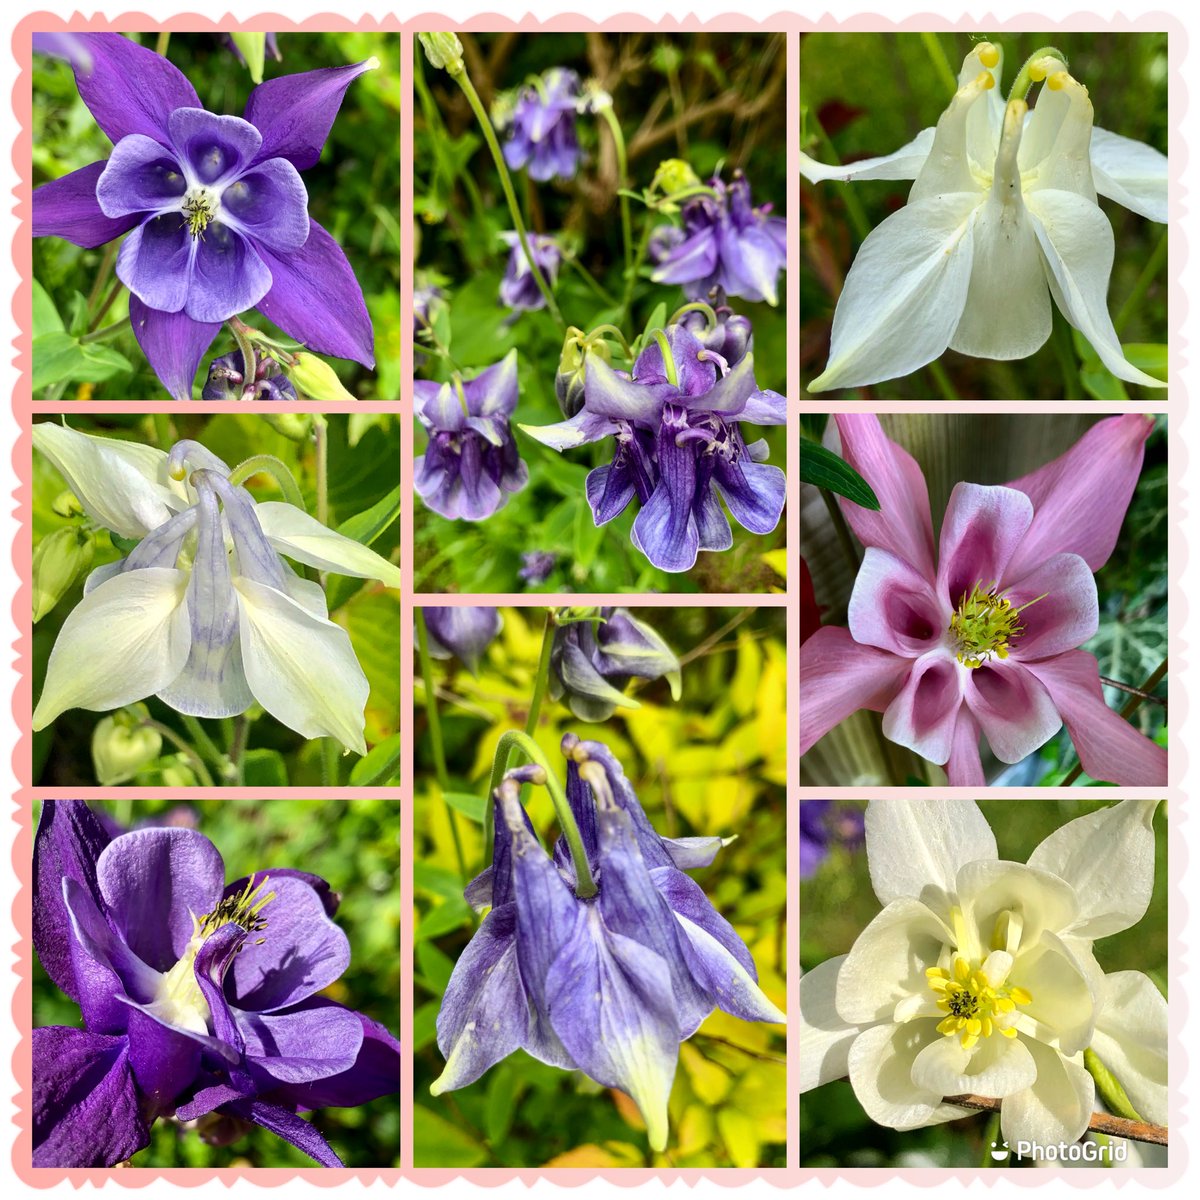 My thrown about aquilegia seed has been beautiful 🤩 #ThursdayVibes #Flowers #seeds #Aquilegia #Gardening